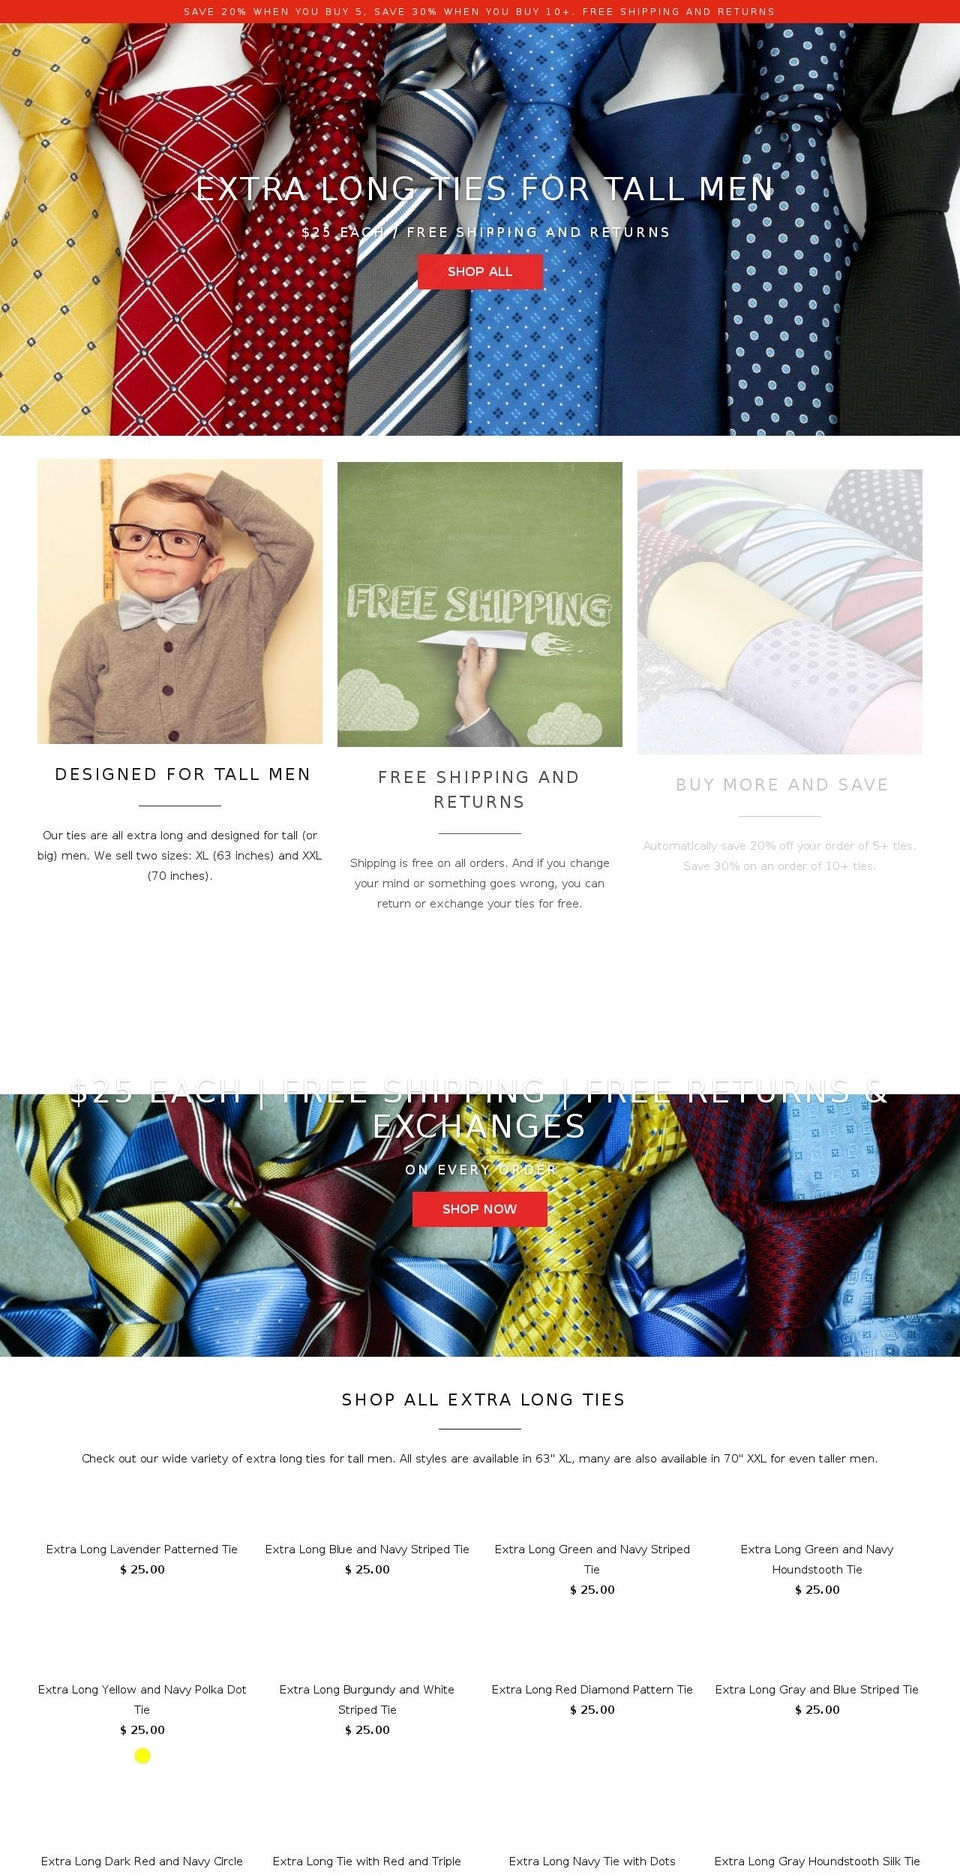 Be Yours Shopify theme site example longtiestore.com